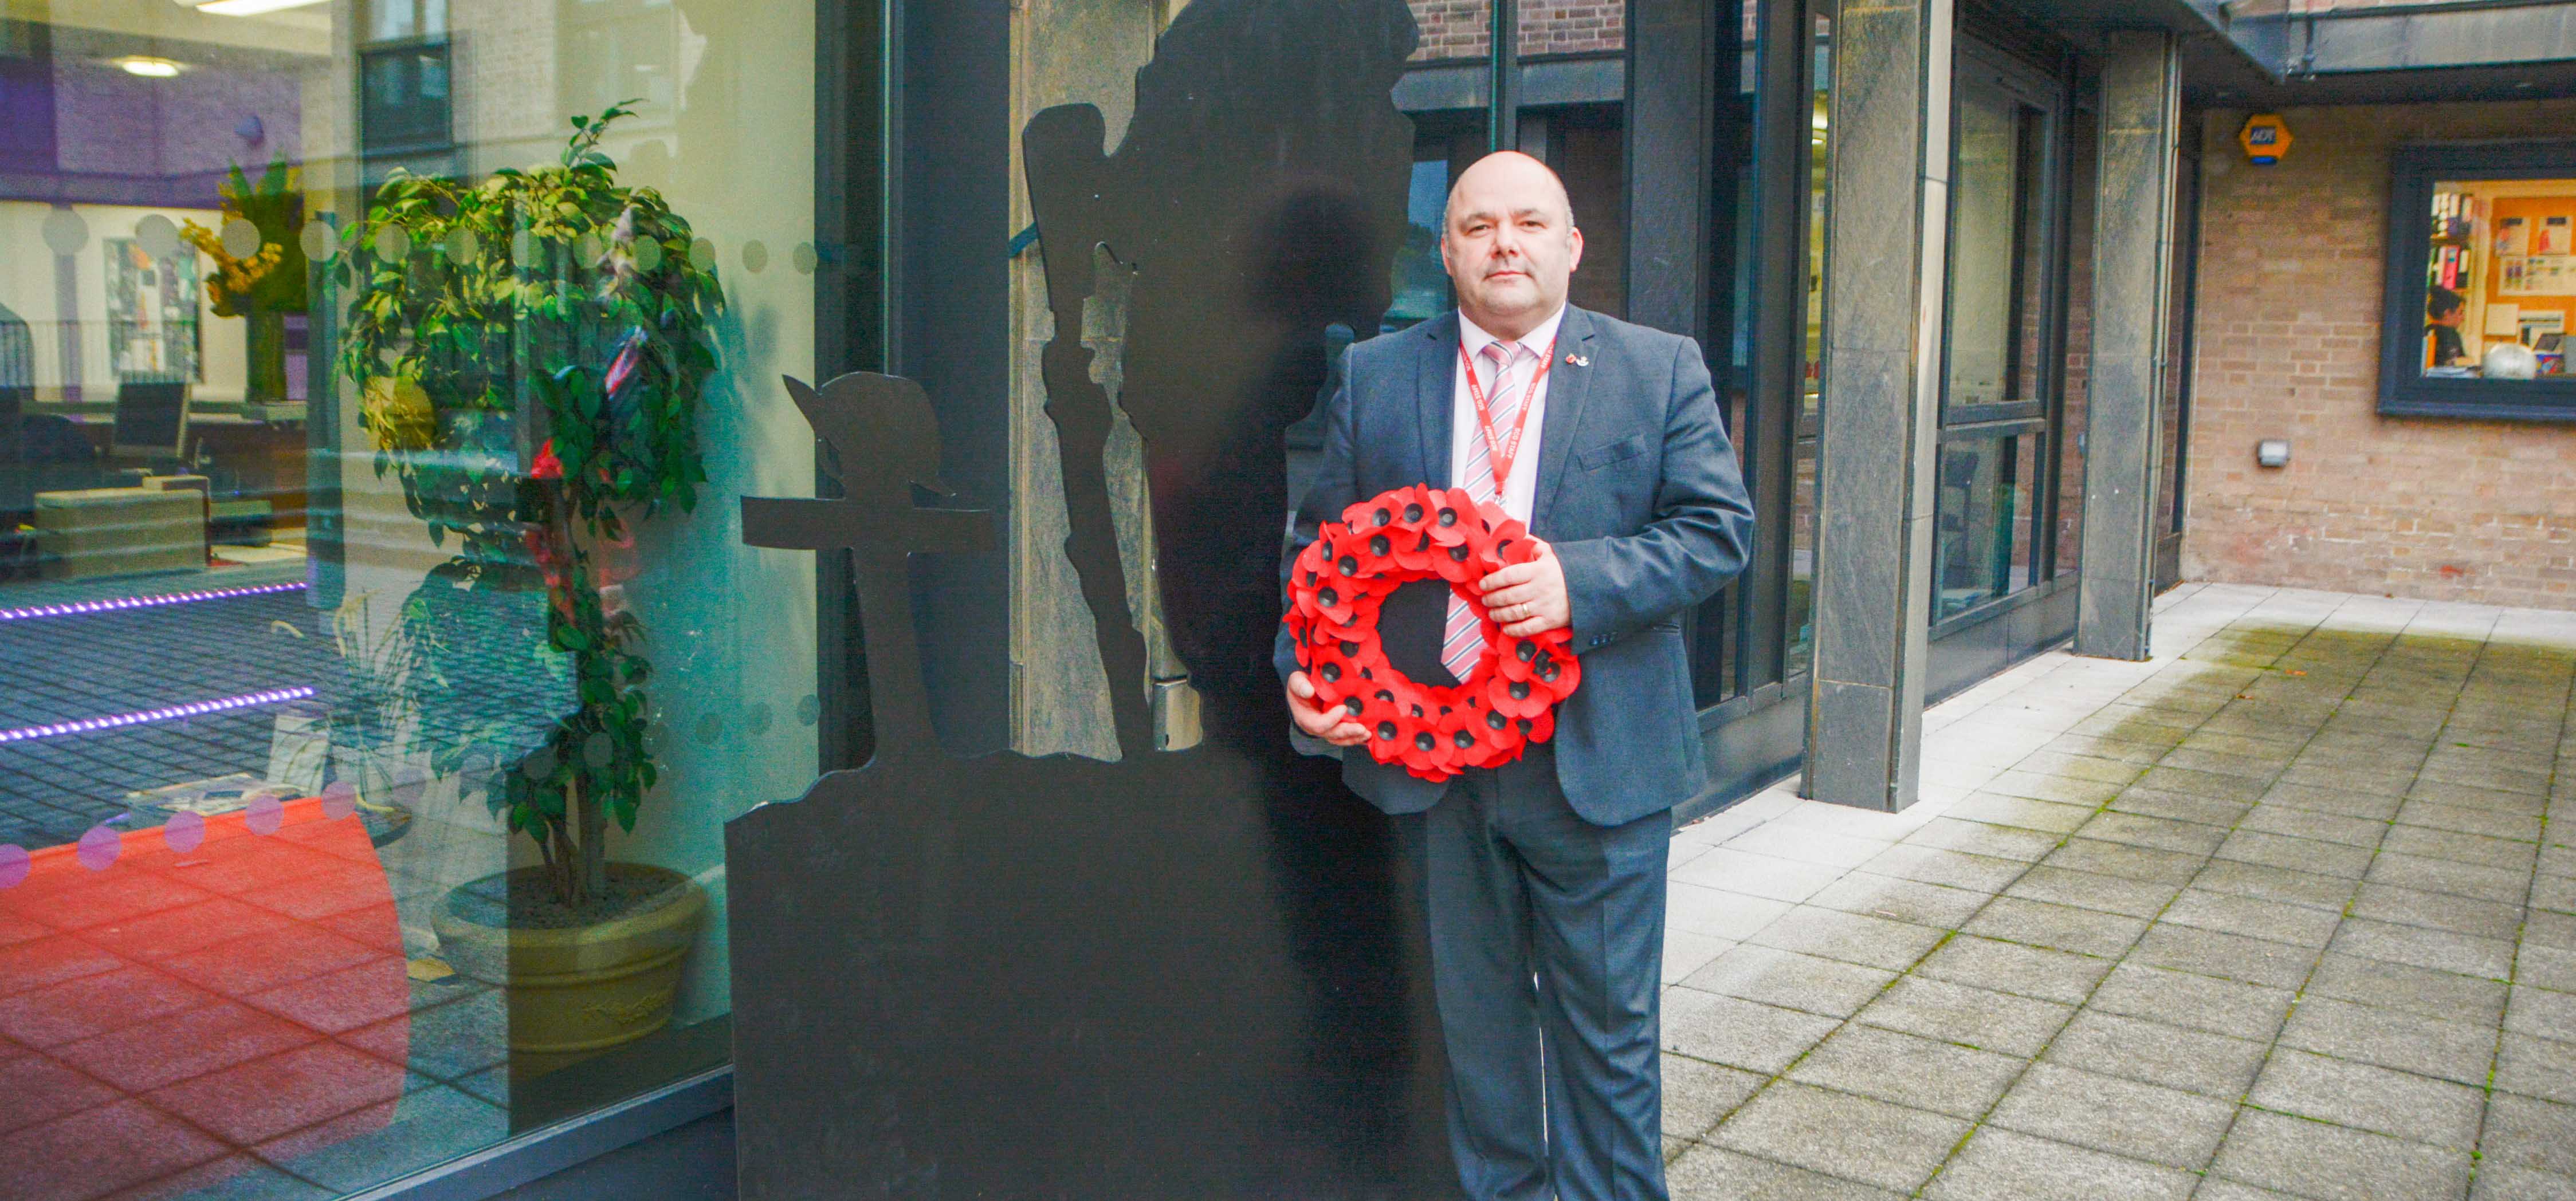 College Commercial Manager holding a poppy wreath and standing next to wooden silhouette of a soldier.